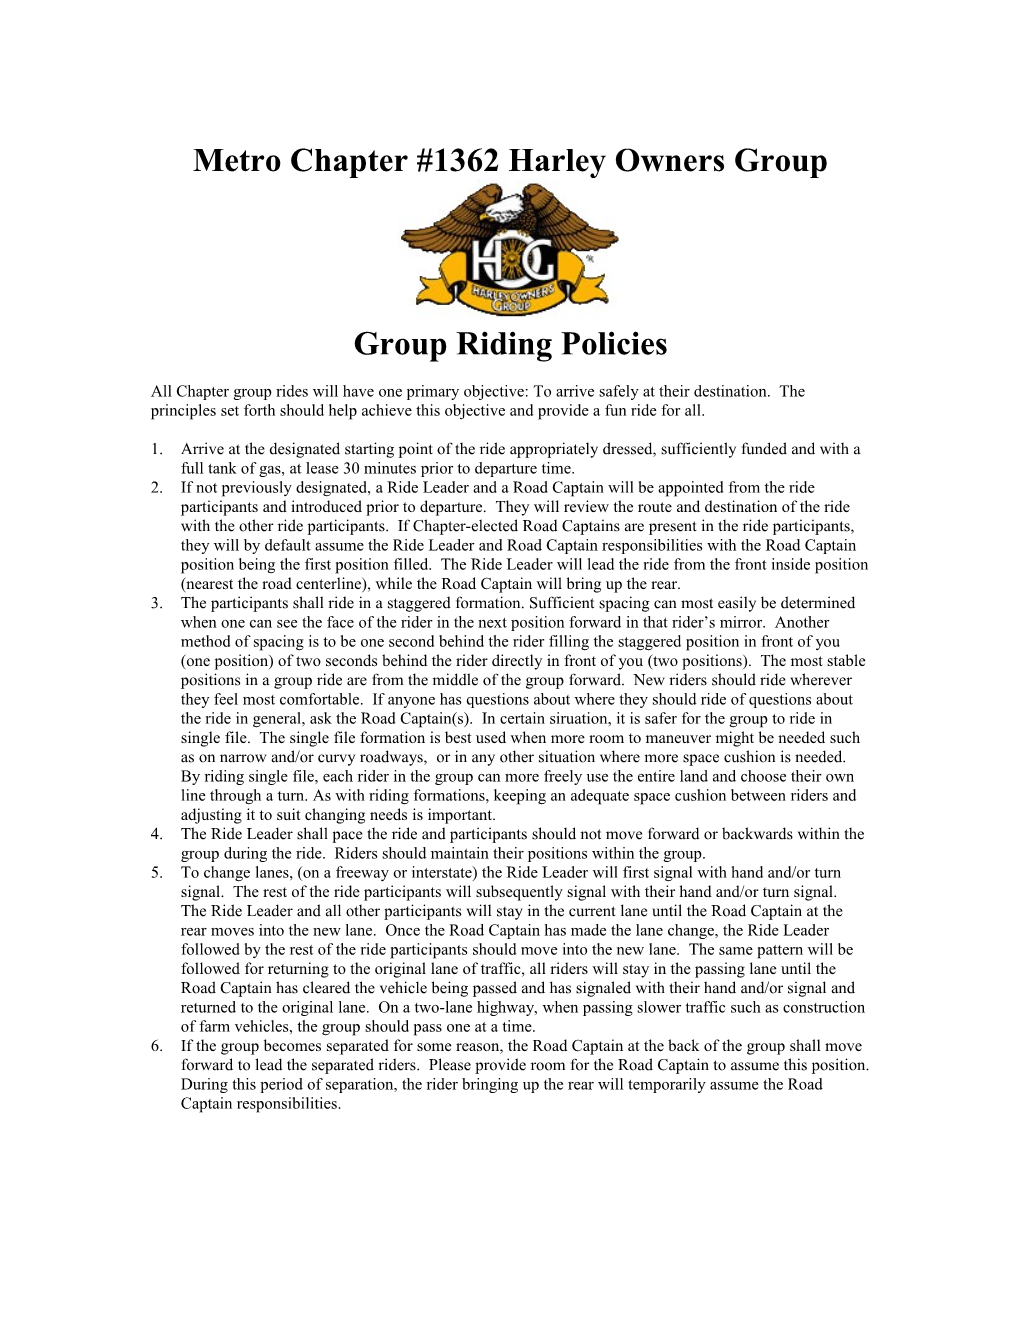 Group Ride Policies - Metro Chapter #1362 Harley Owners Group